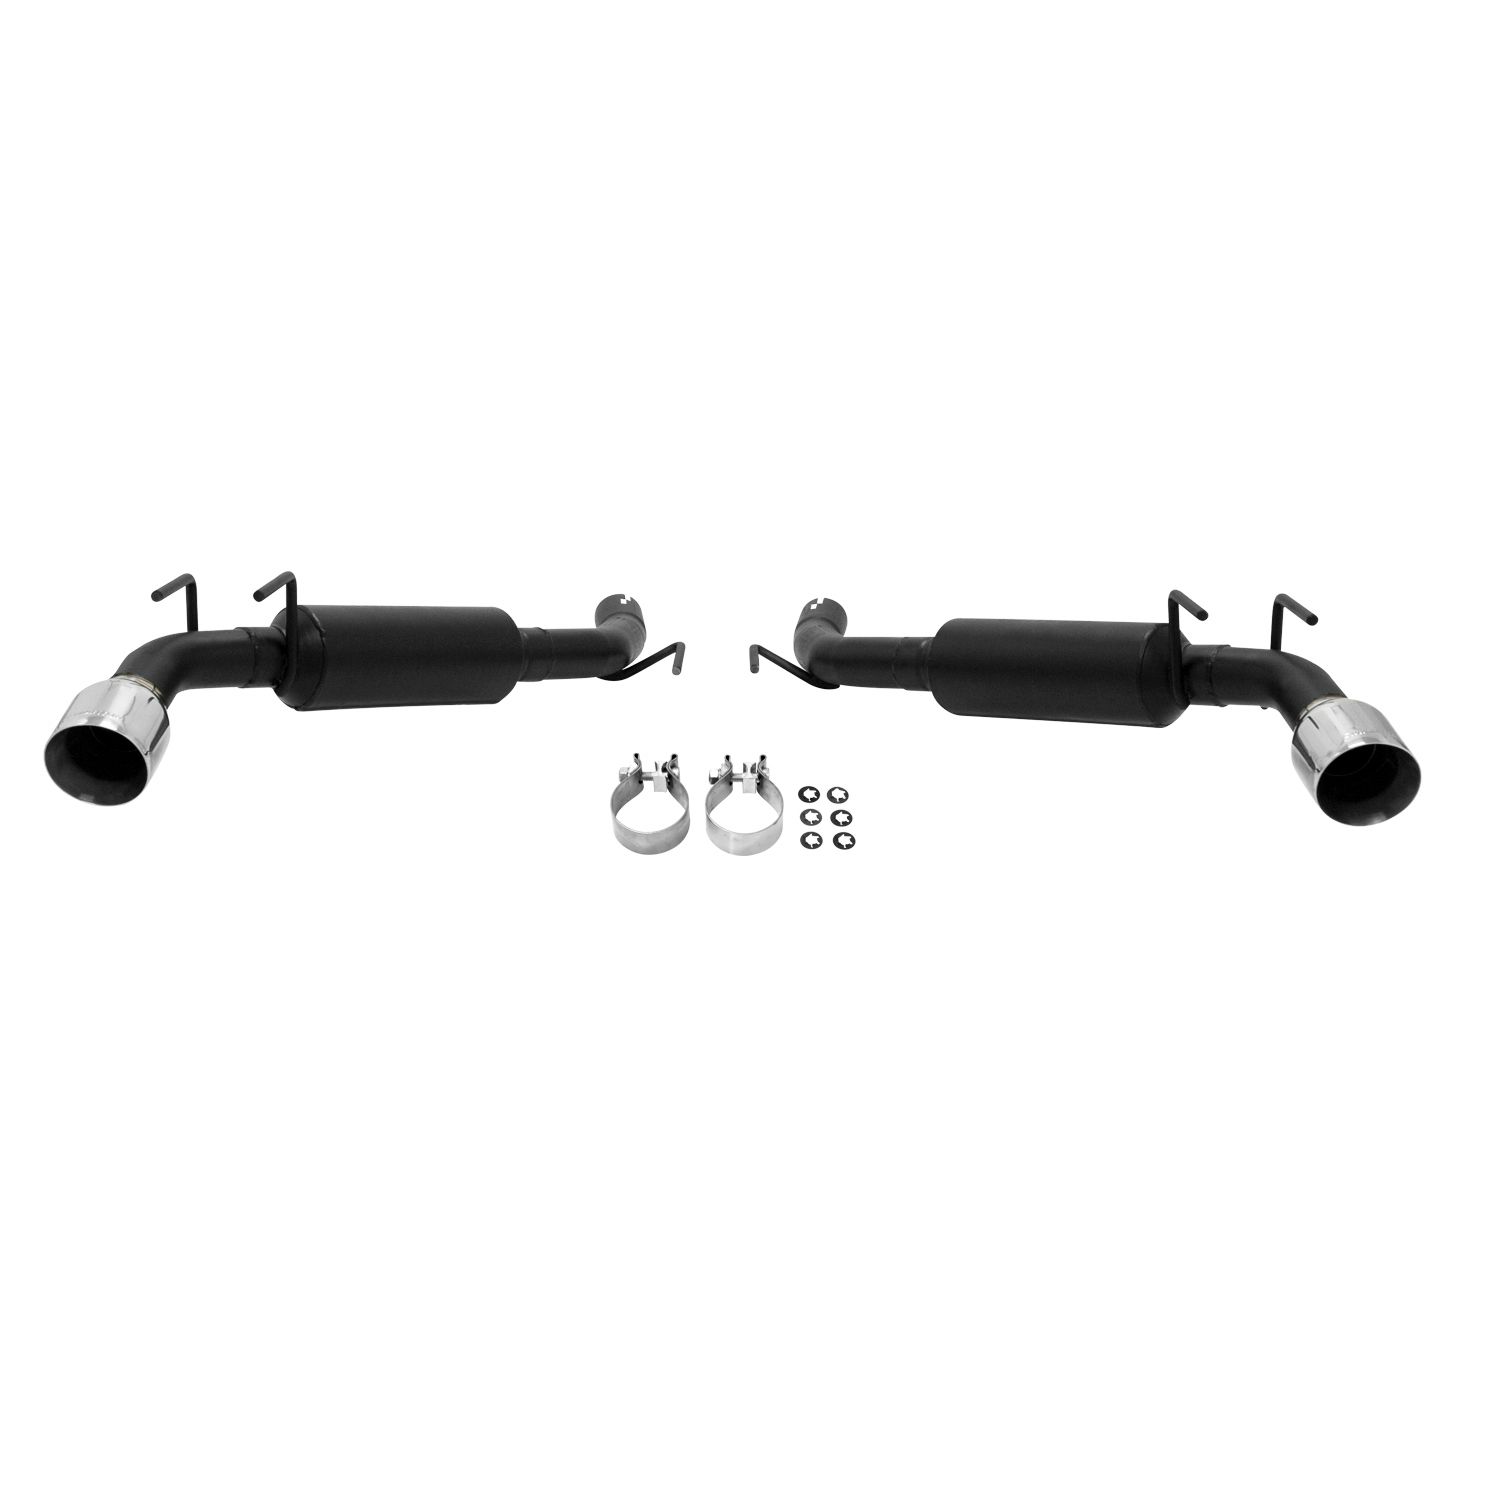 2014-2015 Chevrolet Camaro SS 6.2L Flowmaster Outlaw Axle-Back Exhaust